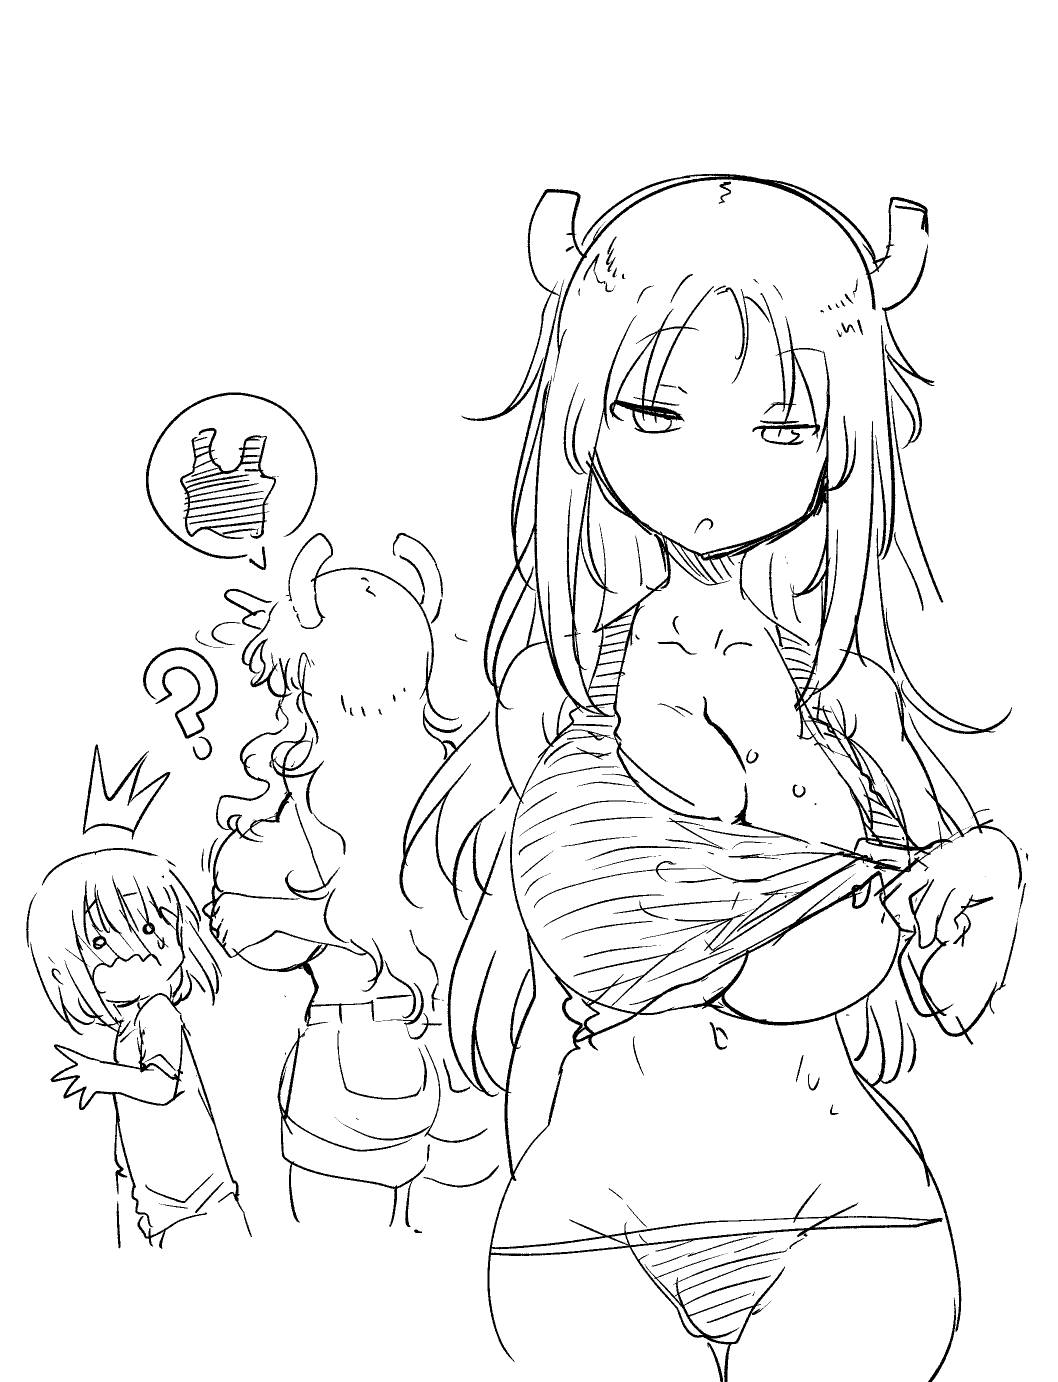 1boy 1boy2girls 2girls 2girls1boy background_characters big_breasts black_and_white black_panties black_tank_top blush blush blush_lines blushing_male braless breasts breasts cleavage colorless cool-kyou_shinja curvy curvy_body curvy_female curvy_figure curvy_hips dragon dragon_girl dragon_horns dragon_humanoid drawing eyes_half_open female female_focus female_humanoid flustered greyscale hair hi_res high_resolution highres horn horned_humanoid horns hourglass_figure huge_breasts human kobayashi-san_chi_no_maidragon large_breasts long_hair looking_at_viewer lucoa lucoa_(maidragon) magatsuchi_shouta male male_human miss_kobayashi's_dragon_maid monochrome no_bra no_color no_dialogue no_visible_genitalia official_art panties petla question question_mark quetzalcoatl_(dragon_maid) quetzalpetlatl_(dragon_maid) sexy short_shorts simple_background sister sisters sketch slit_pupils smaller_male speech_bubble standing stolen_clothes sweat sweatdrop sweating sweaty sweaty_body sweaty_breasts tank_top tank_top_lift textless thief topless topless_female underboob underwear undressed undressing very_long_hair voluptuous voluptuous_female wearing_others_clothes white_background wide_hips